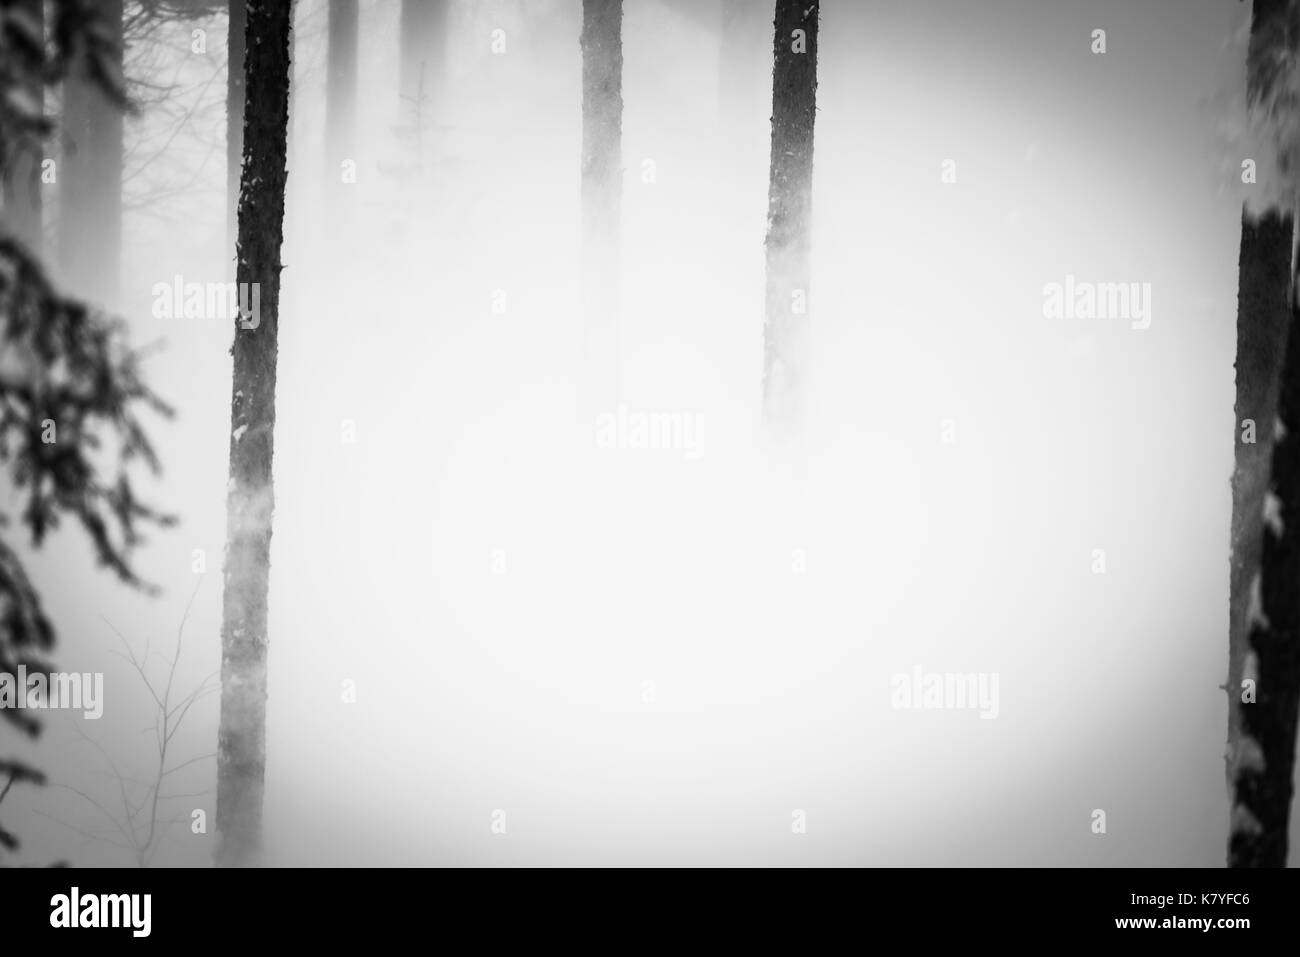 Part of a series of a snowy scene with a pine tree emerging from the white, Finland Stock Photo